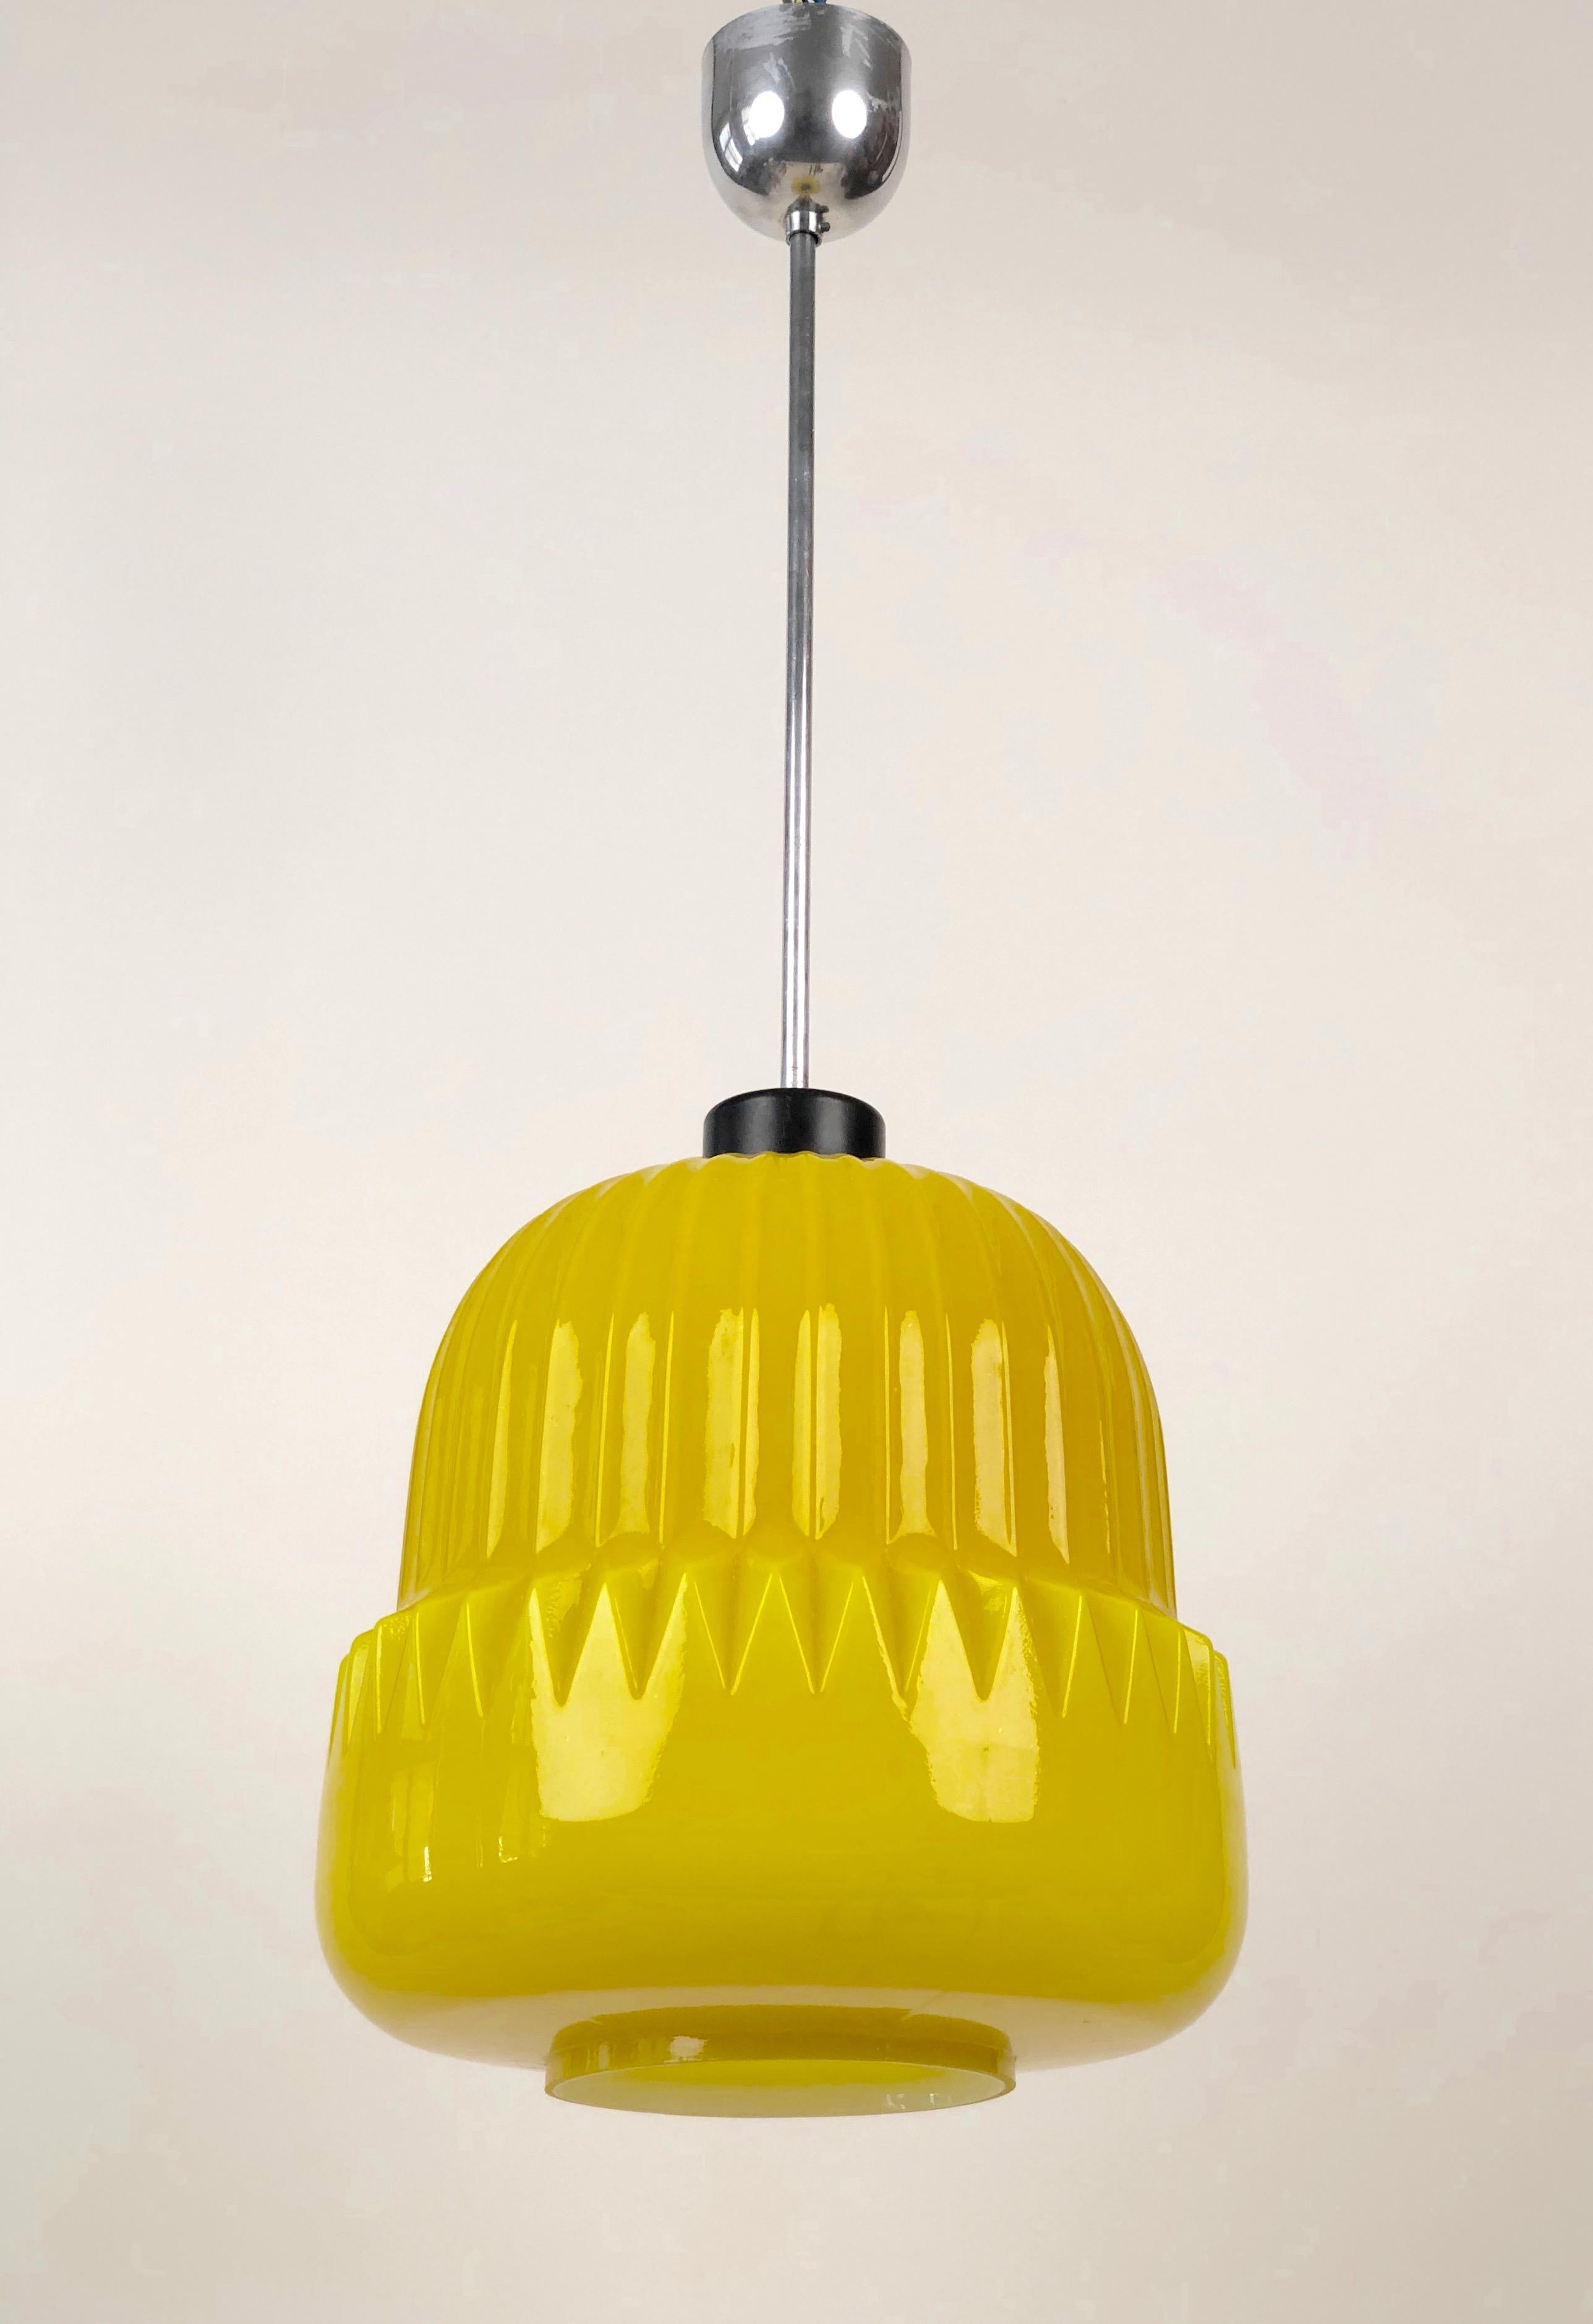 A very unique early 1960s pendant lamp, made in Czechoslovakia. The yellow glass shade has a fluted pattern moulded into the glass form. The light emitted is warm and intense. It glows. I hope that i have achieved an accurate color to give you the